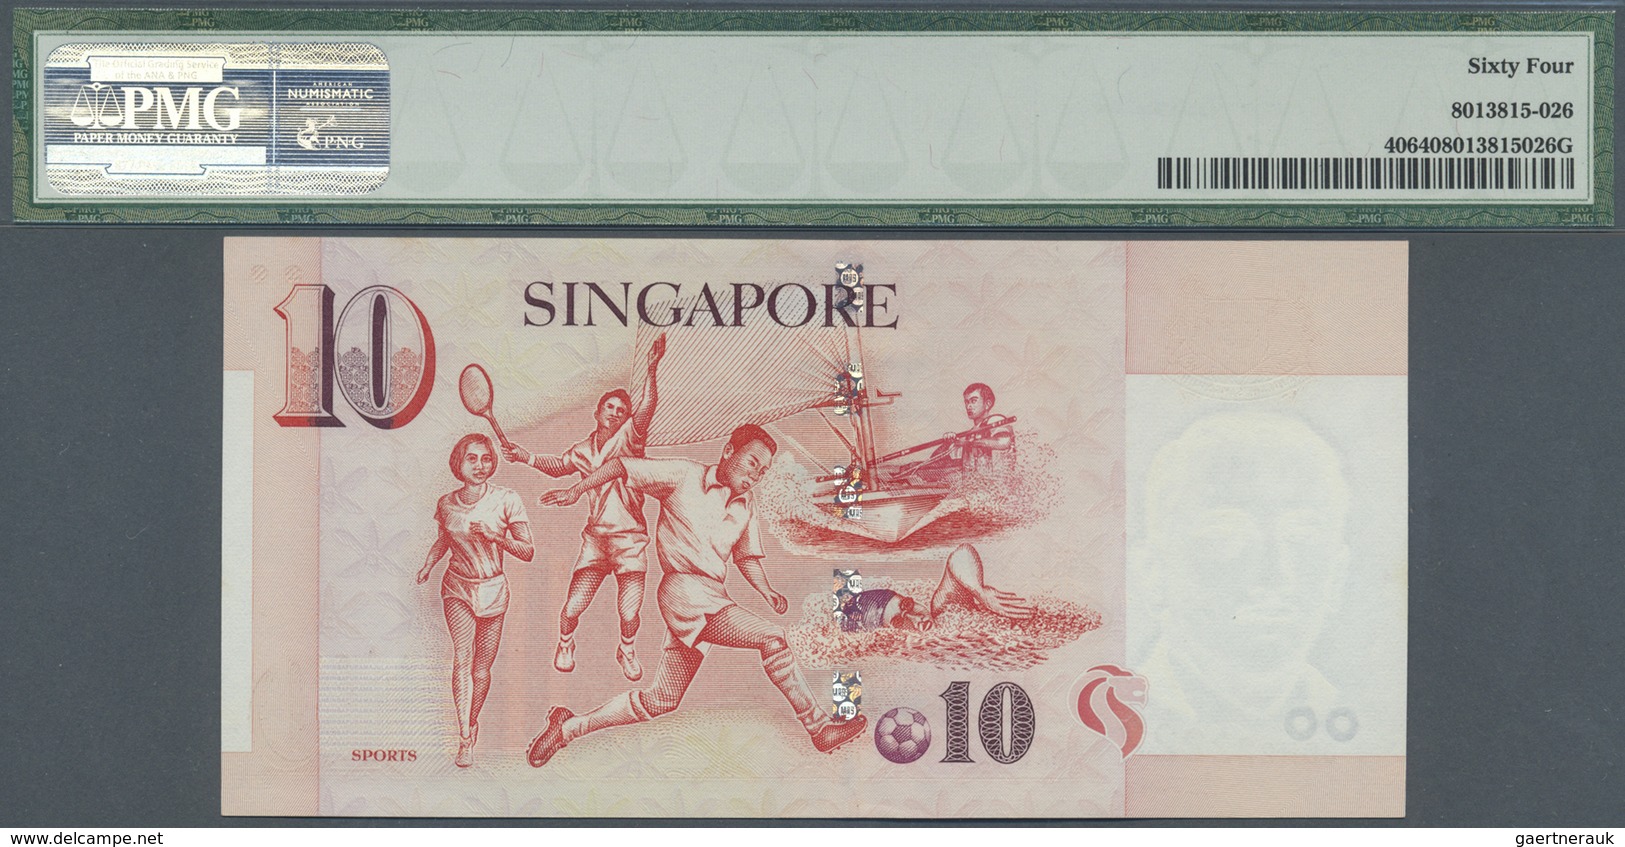 Singapore / Singapur: large and rare set of 10 pcs 10 Dollars ND(1999) P. 40, all with special numbe